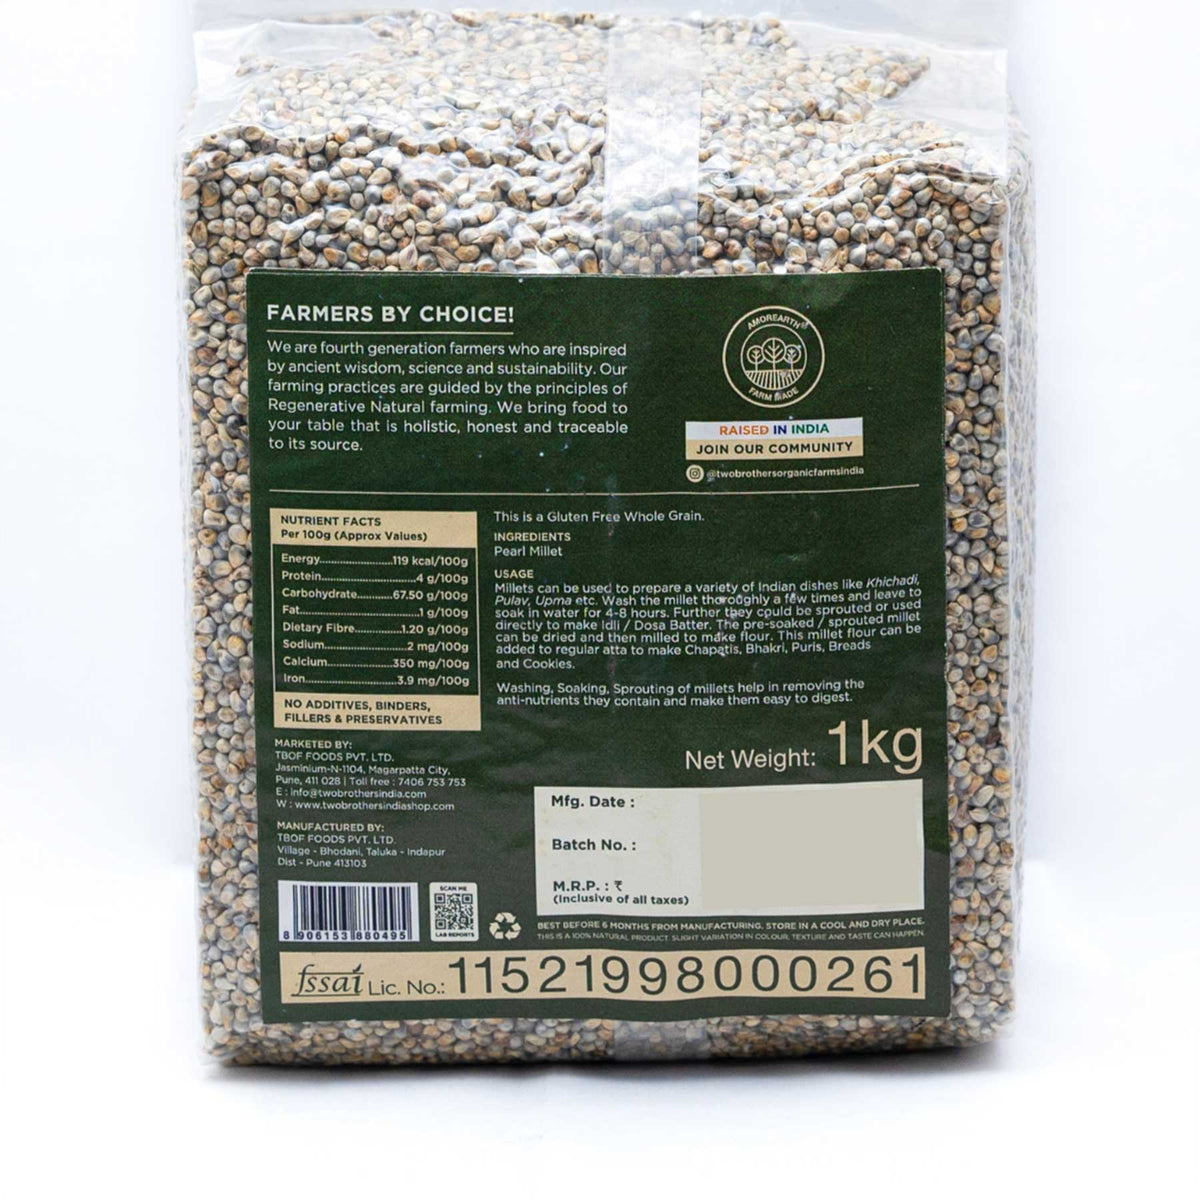 Pearl millets nutritional facts